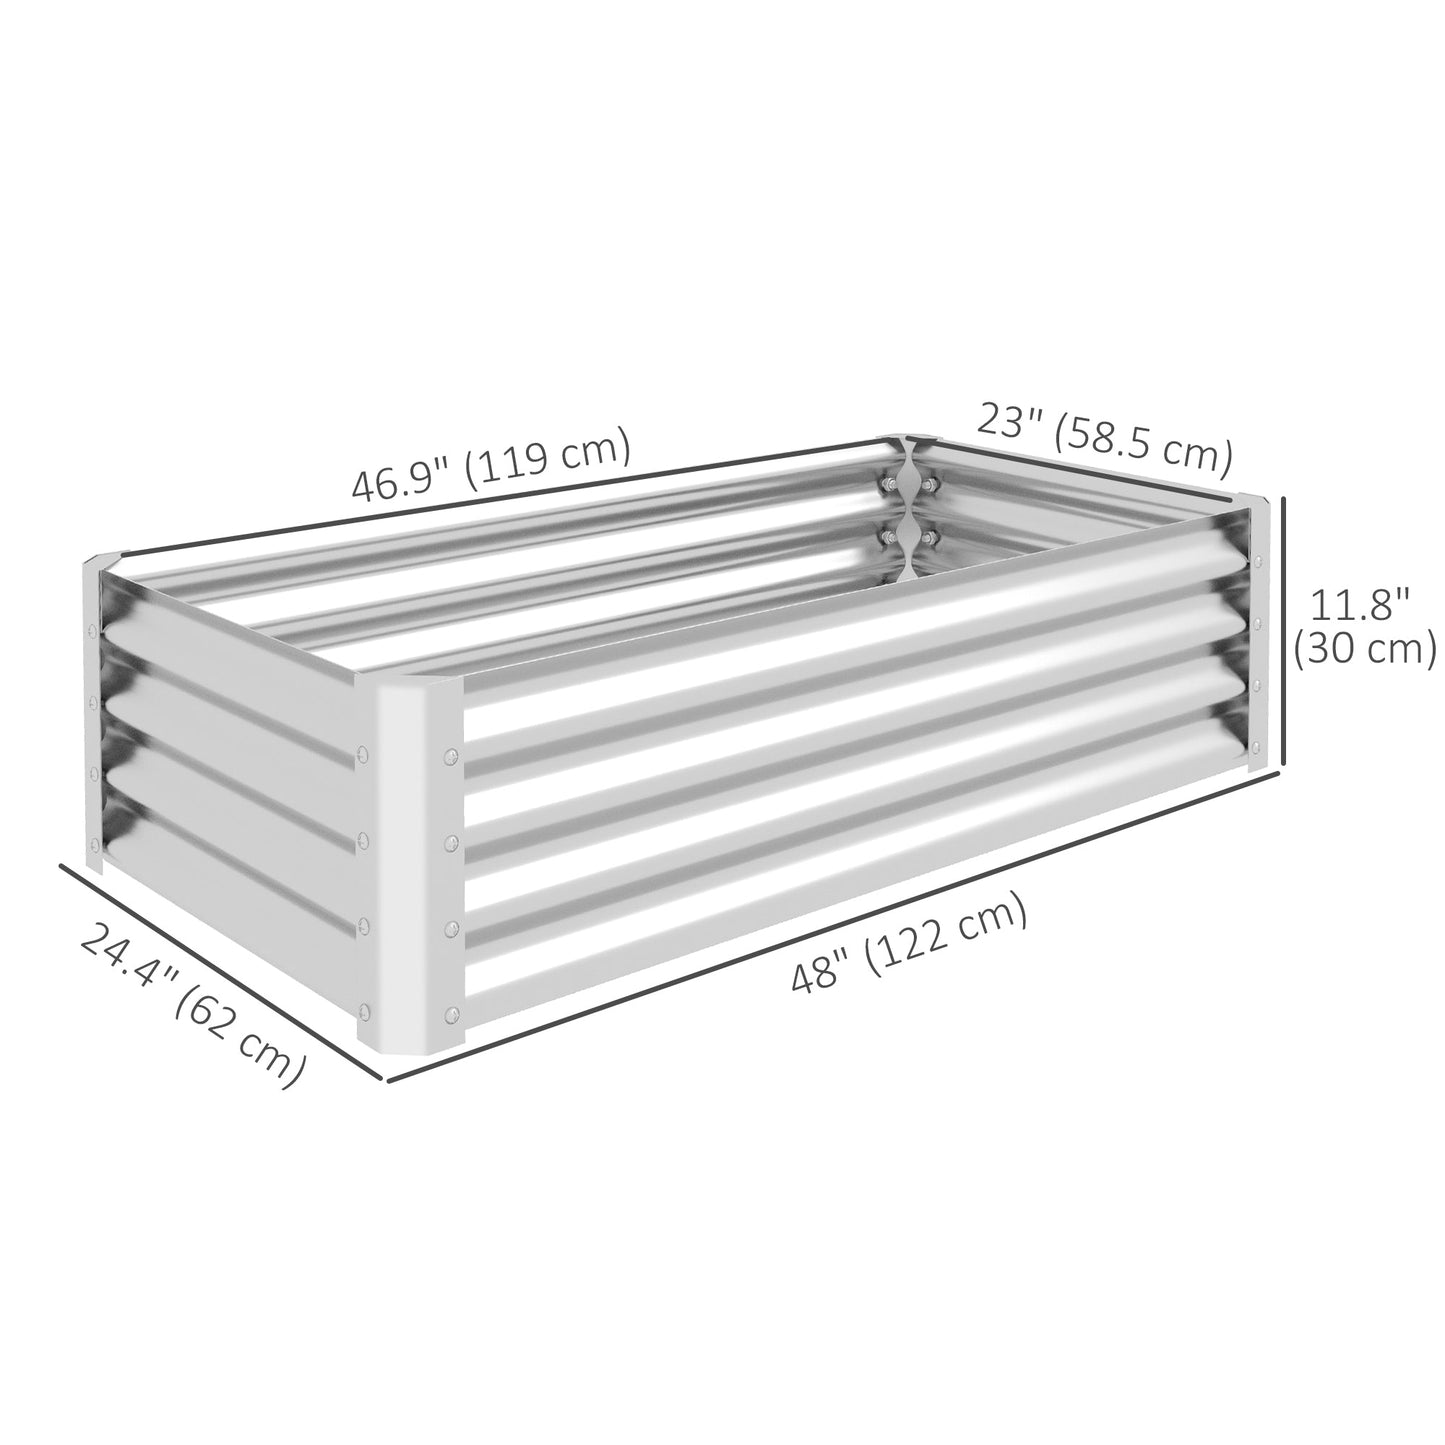 4'x2'x1' Galvanized Raised Bed, Bottomless Elevated Planter Box for Growing Flowers, Herbs and Vegetables, Silver at Gallery Canada